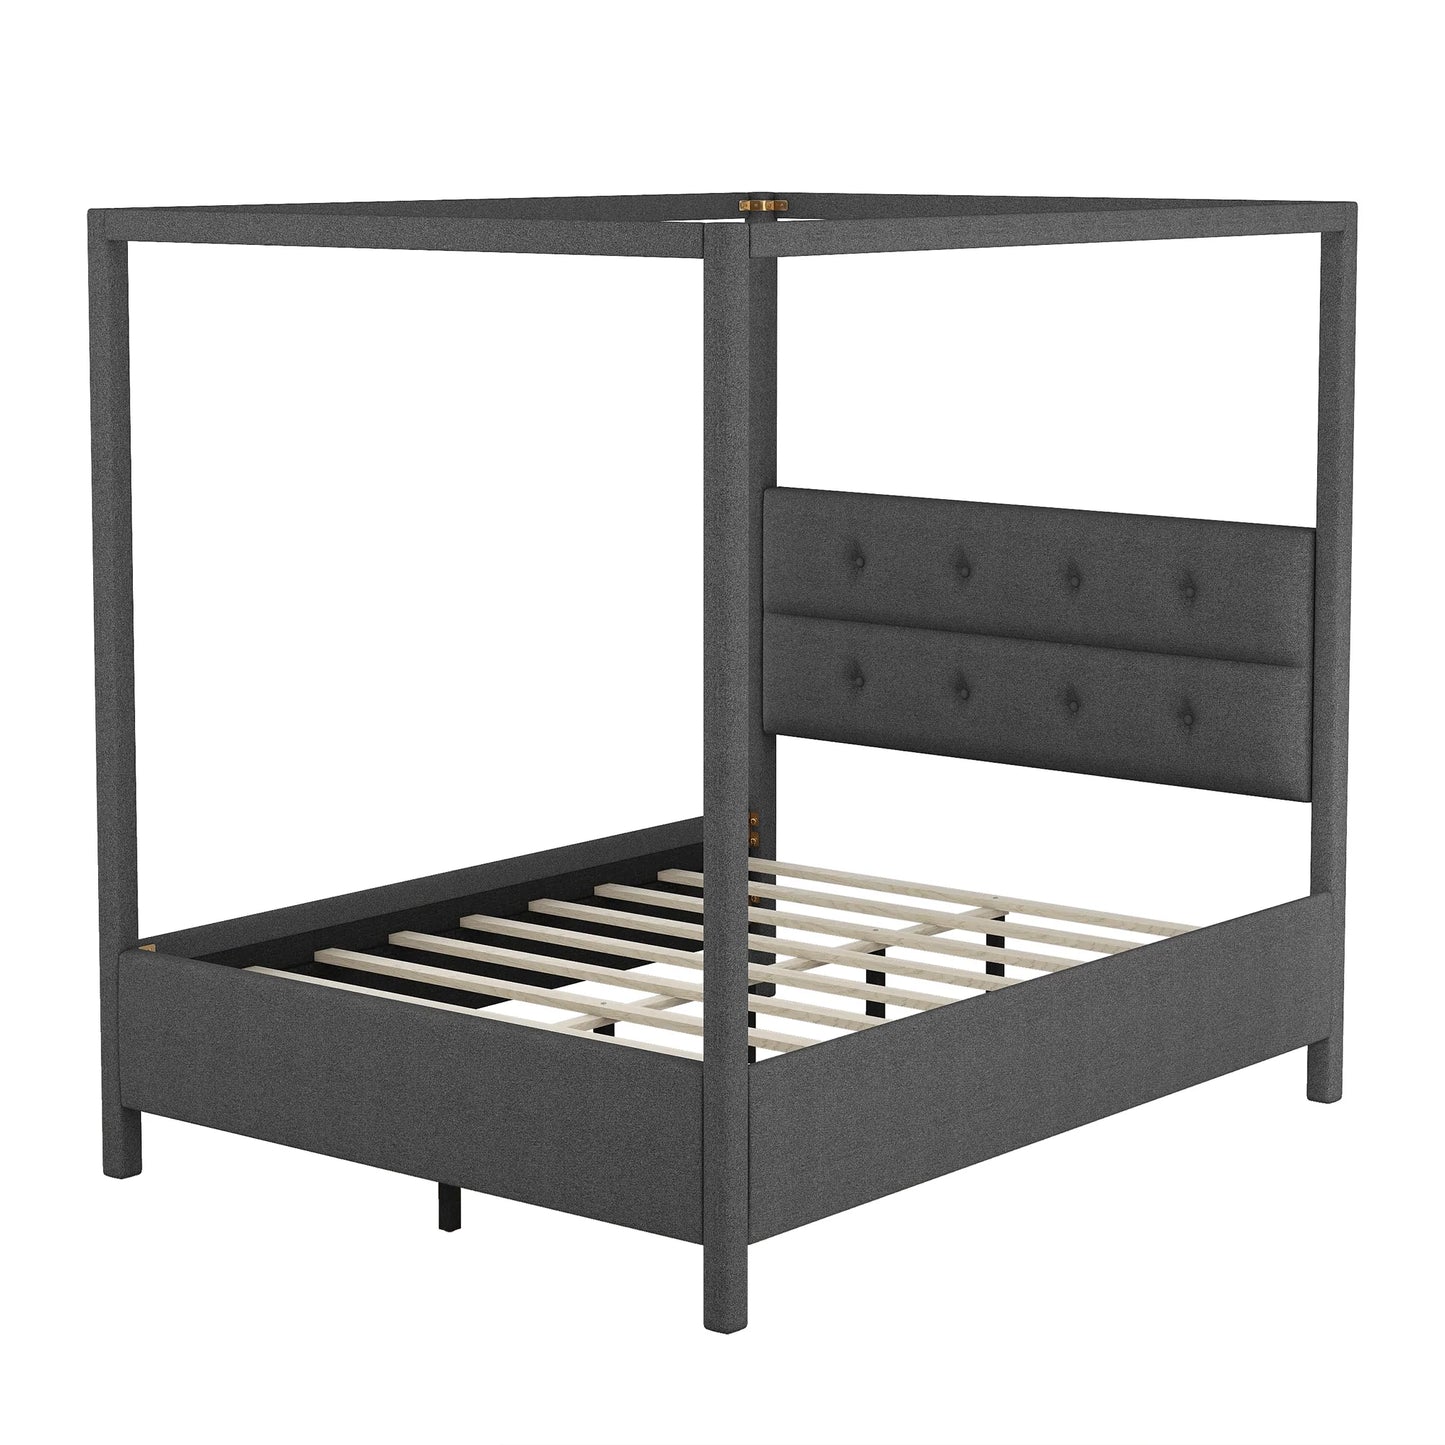 Platform Bed with Headboard Queen Size in Gray